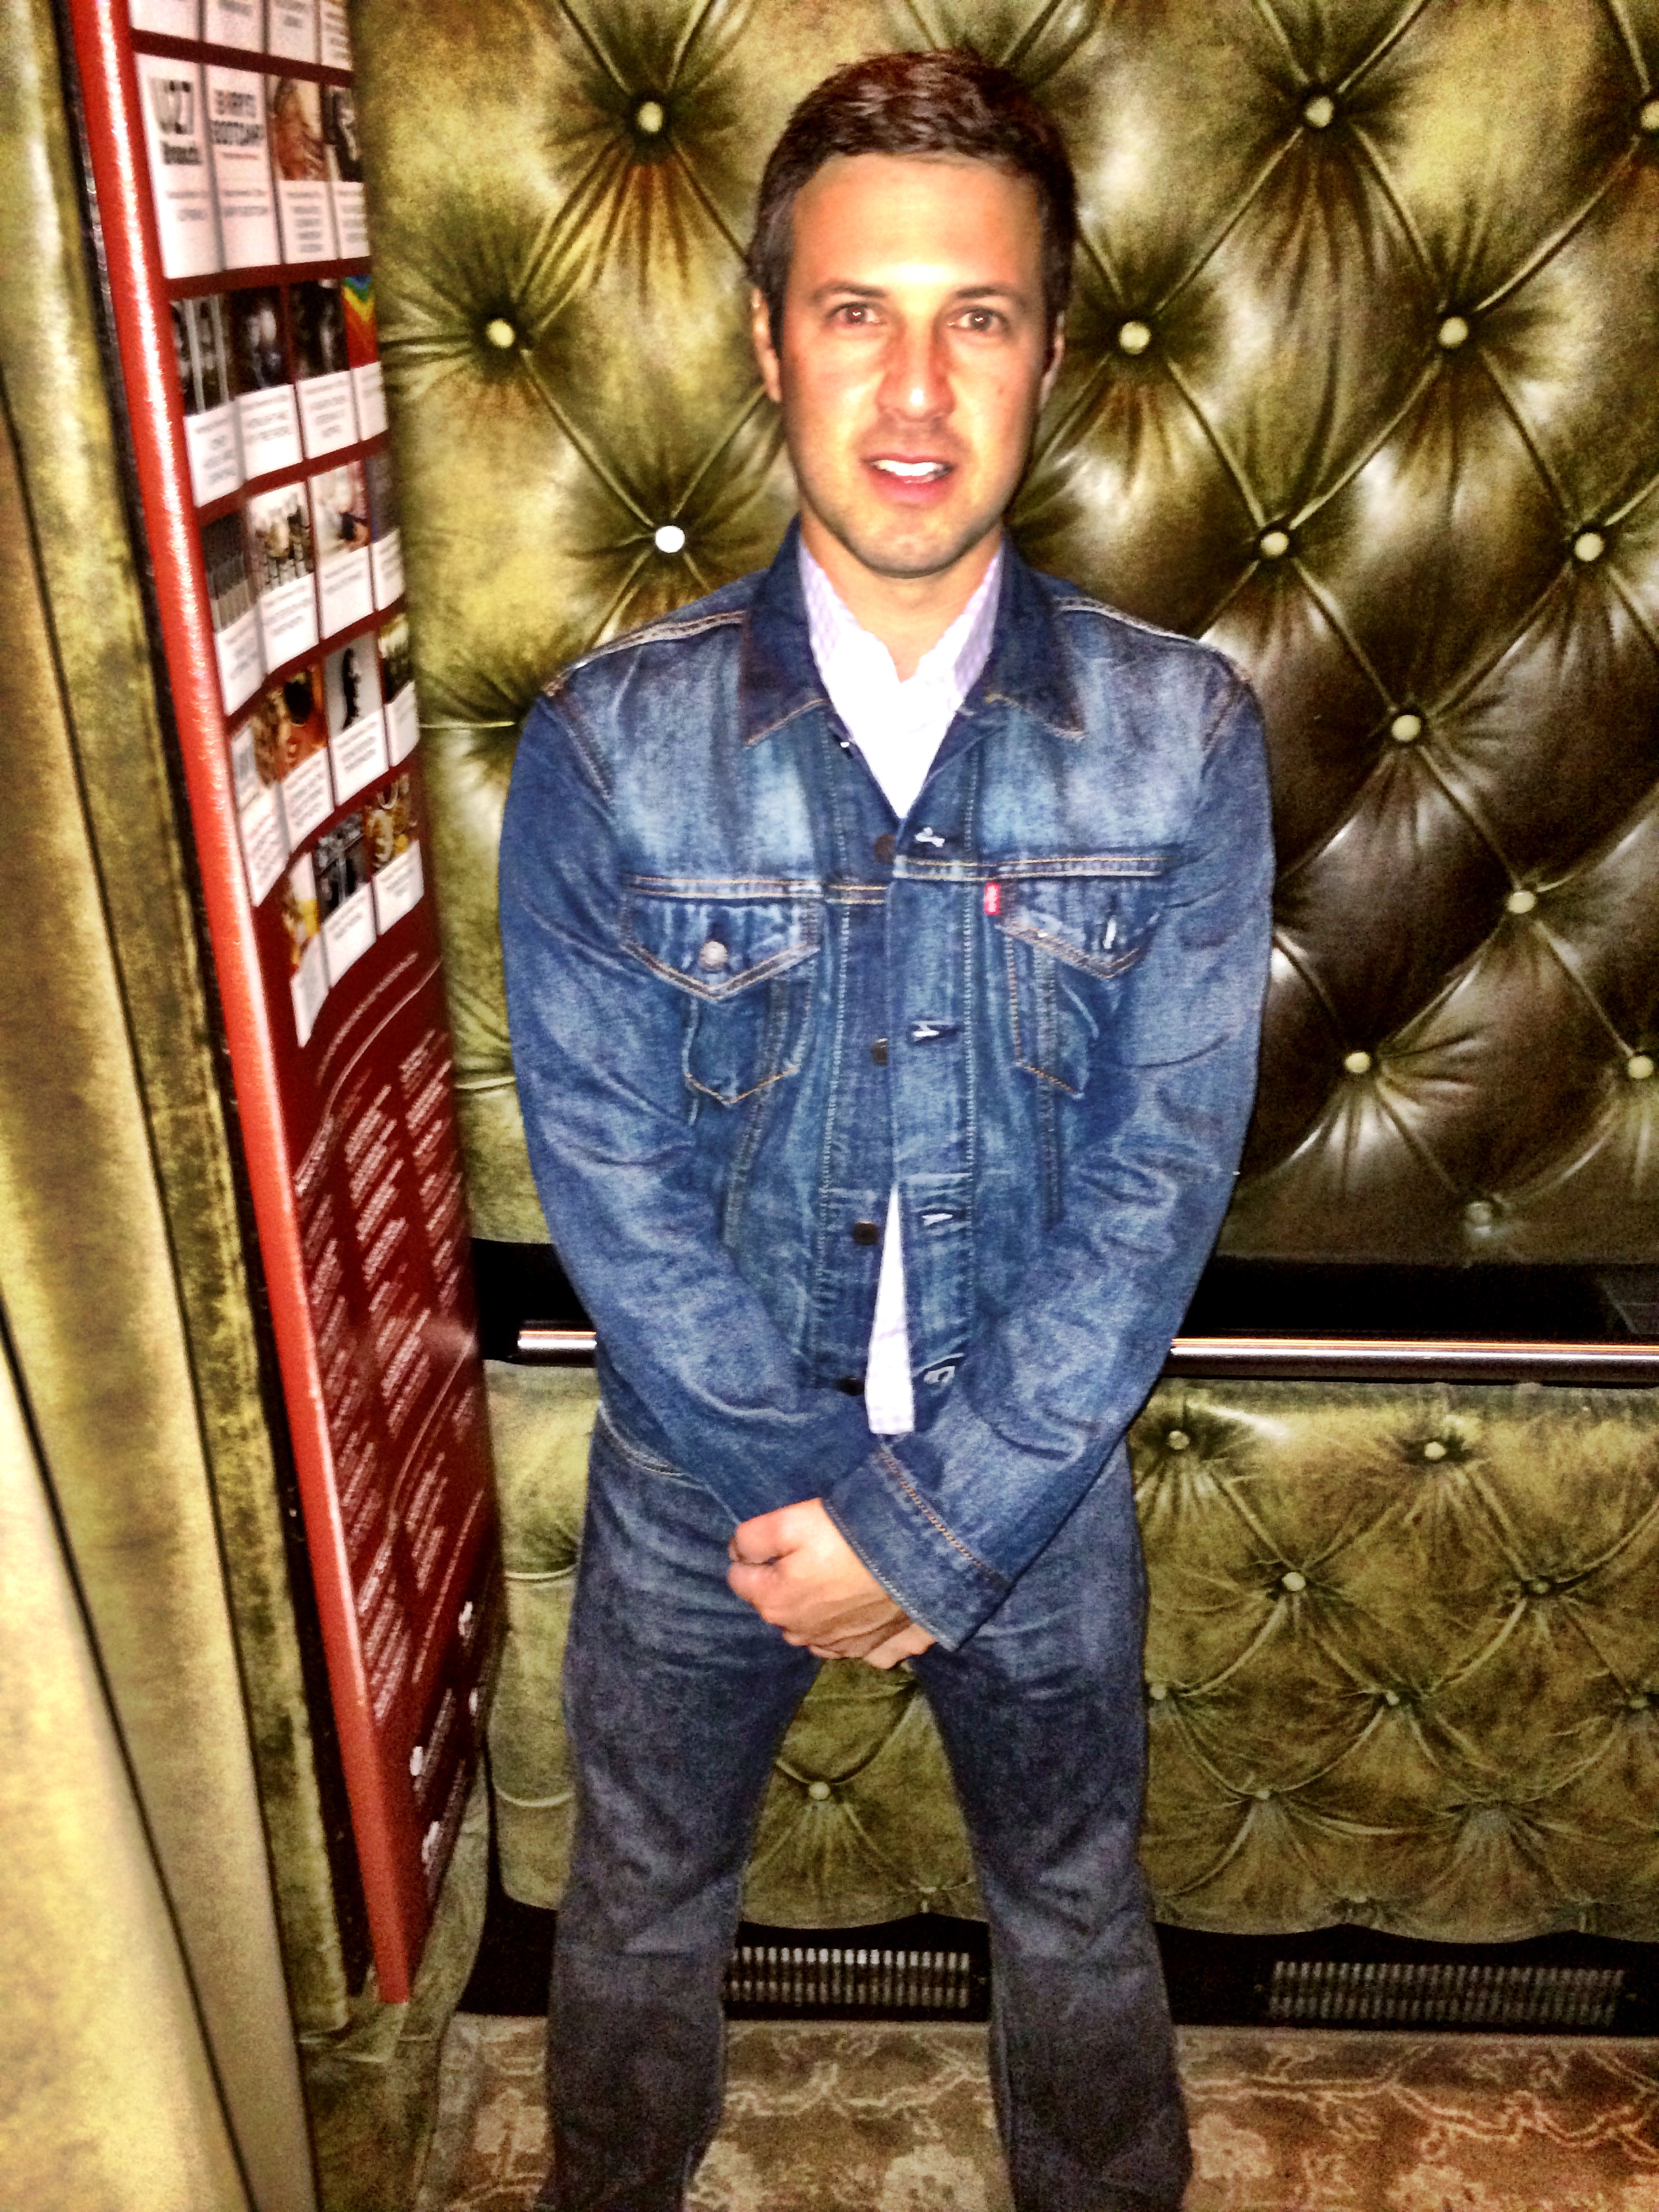 Loving this Canadian Tuxedo by Levi's | That's one dope ass Canadian Tuxedo